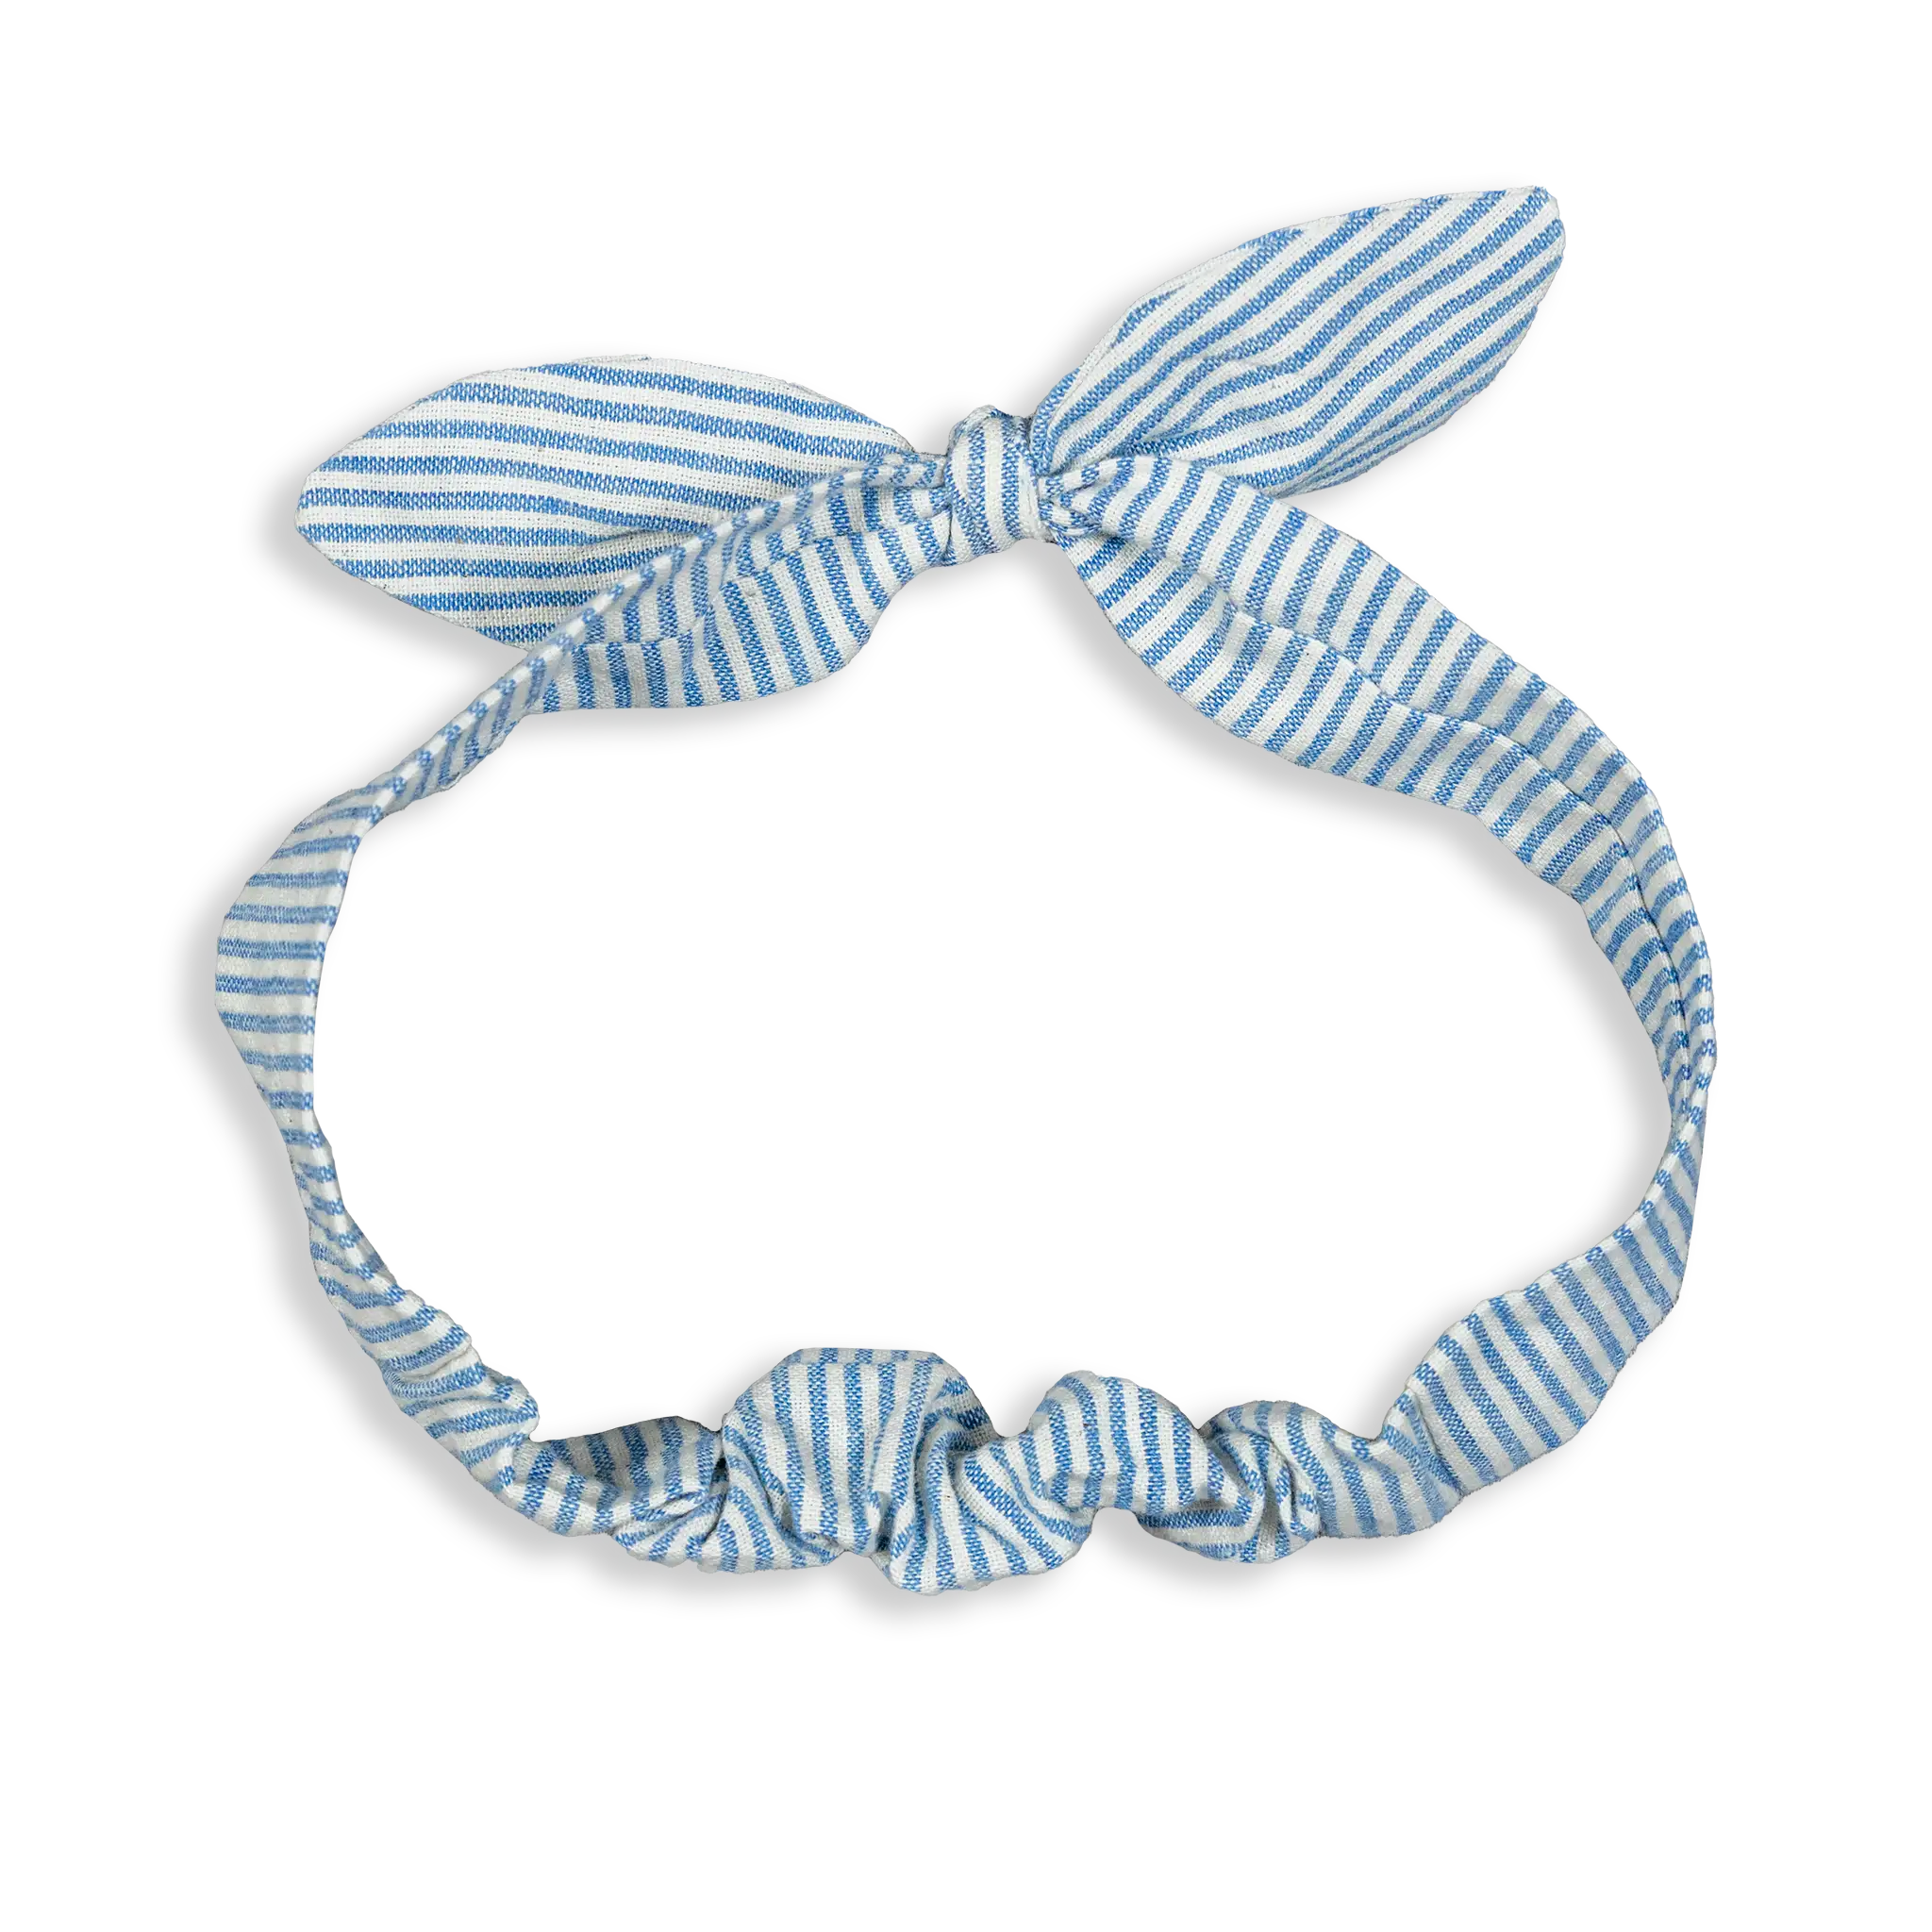 Our sweet little Headbands go with just about anything your child is wearing made from 100% cotton and in plain or striped variations.